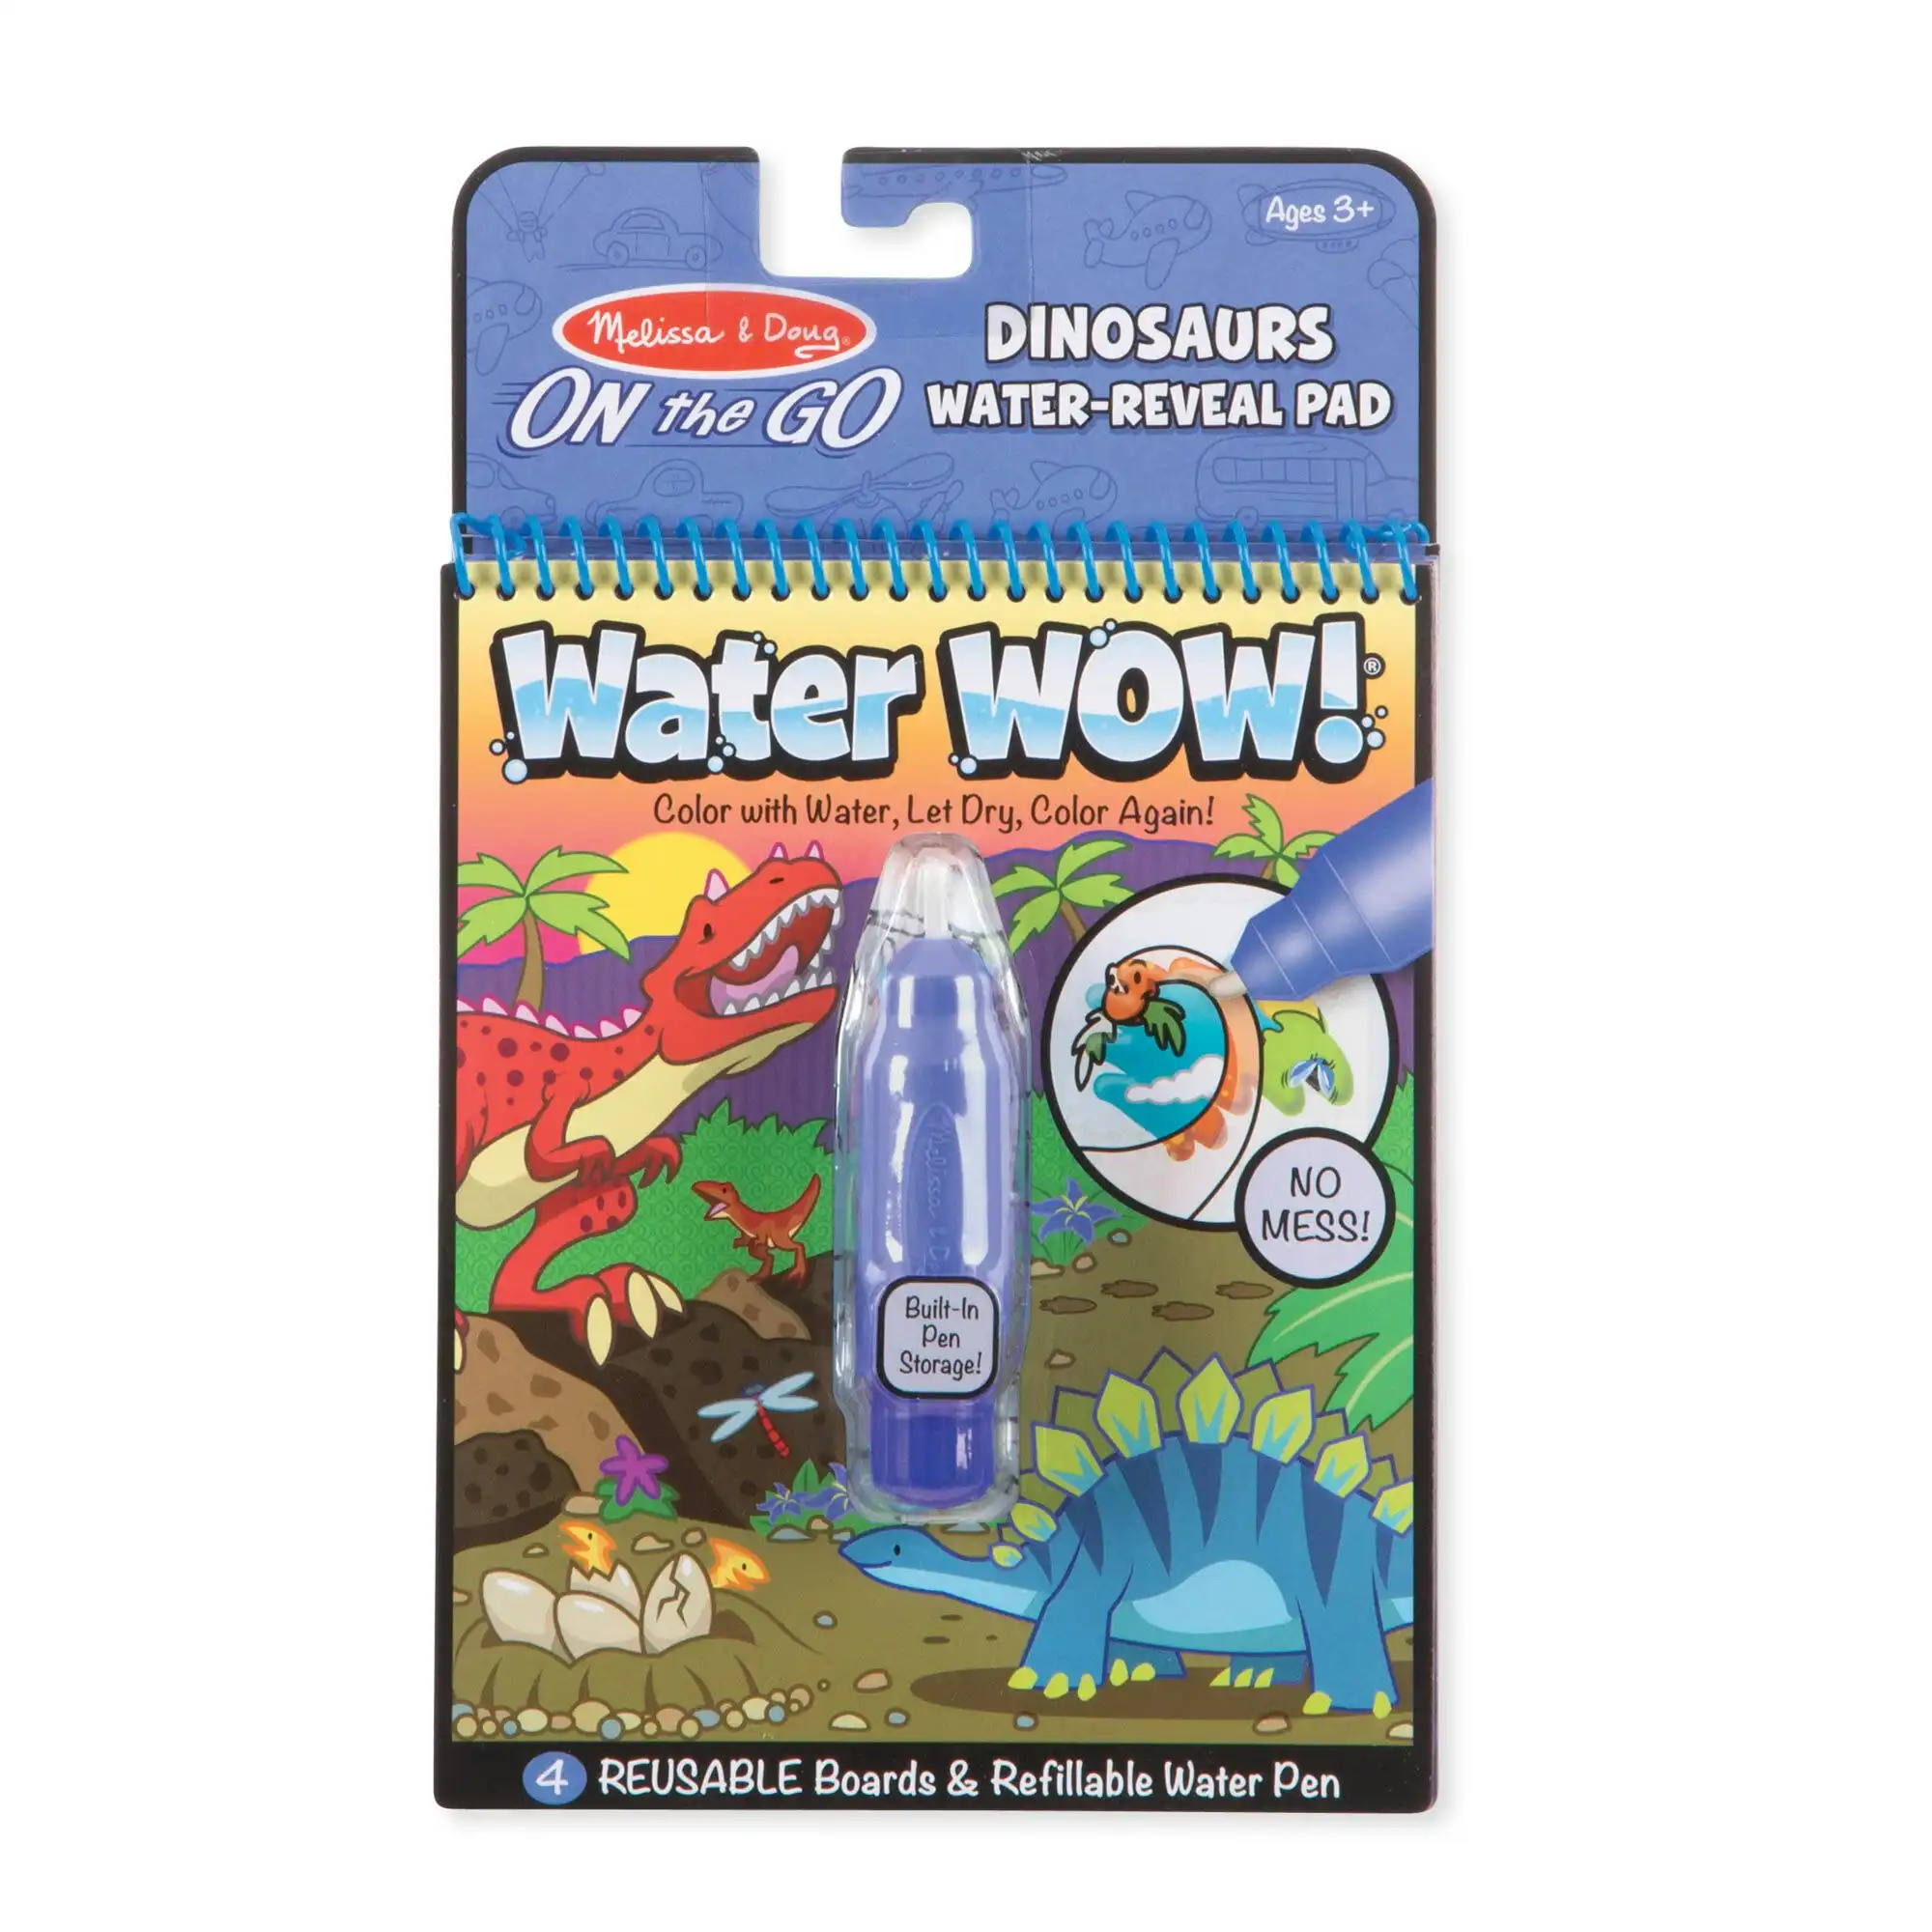 Melissa & Doug - Water Wow! Dinosaurs Water-reveal Pad - On The Go Travel Activity